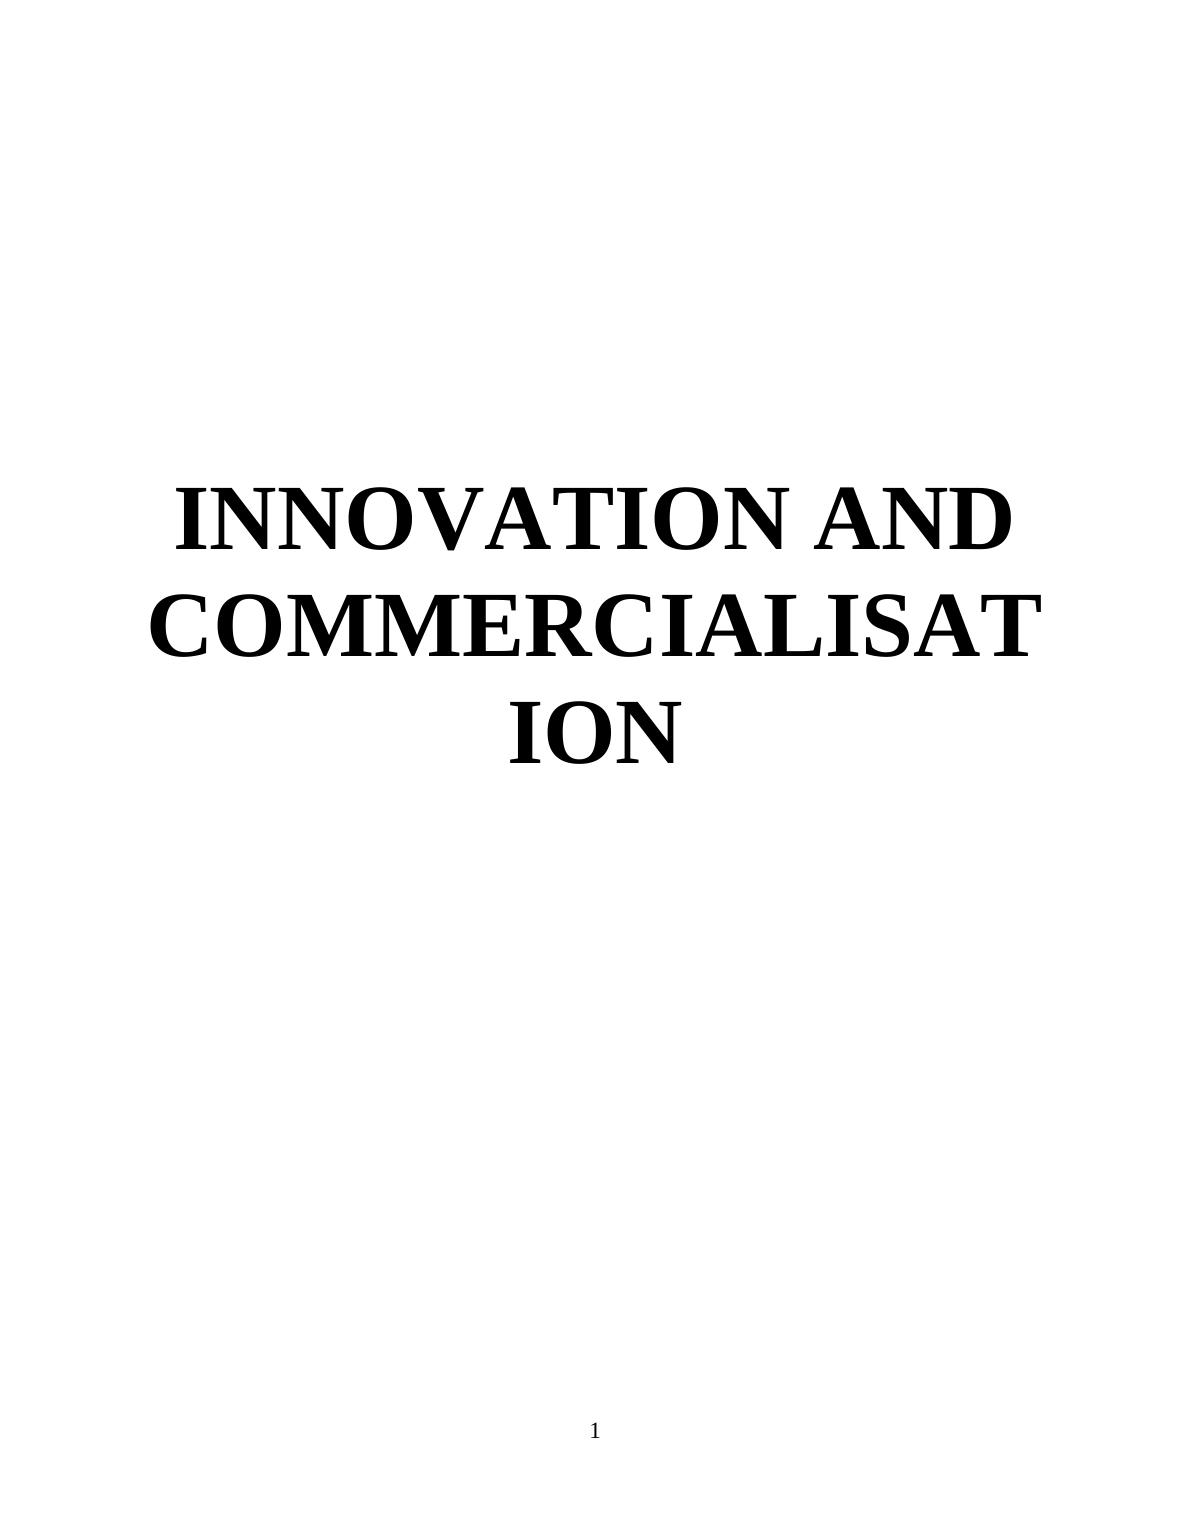 Innovation and Commercialisation Assignment Solved - Tesco Plc_1